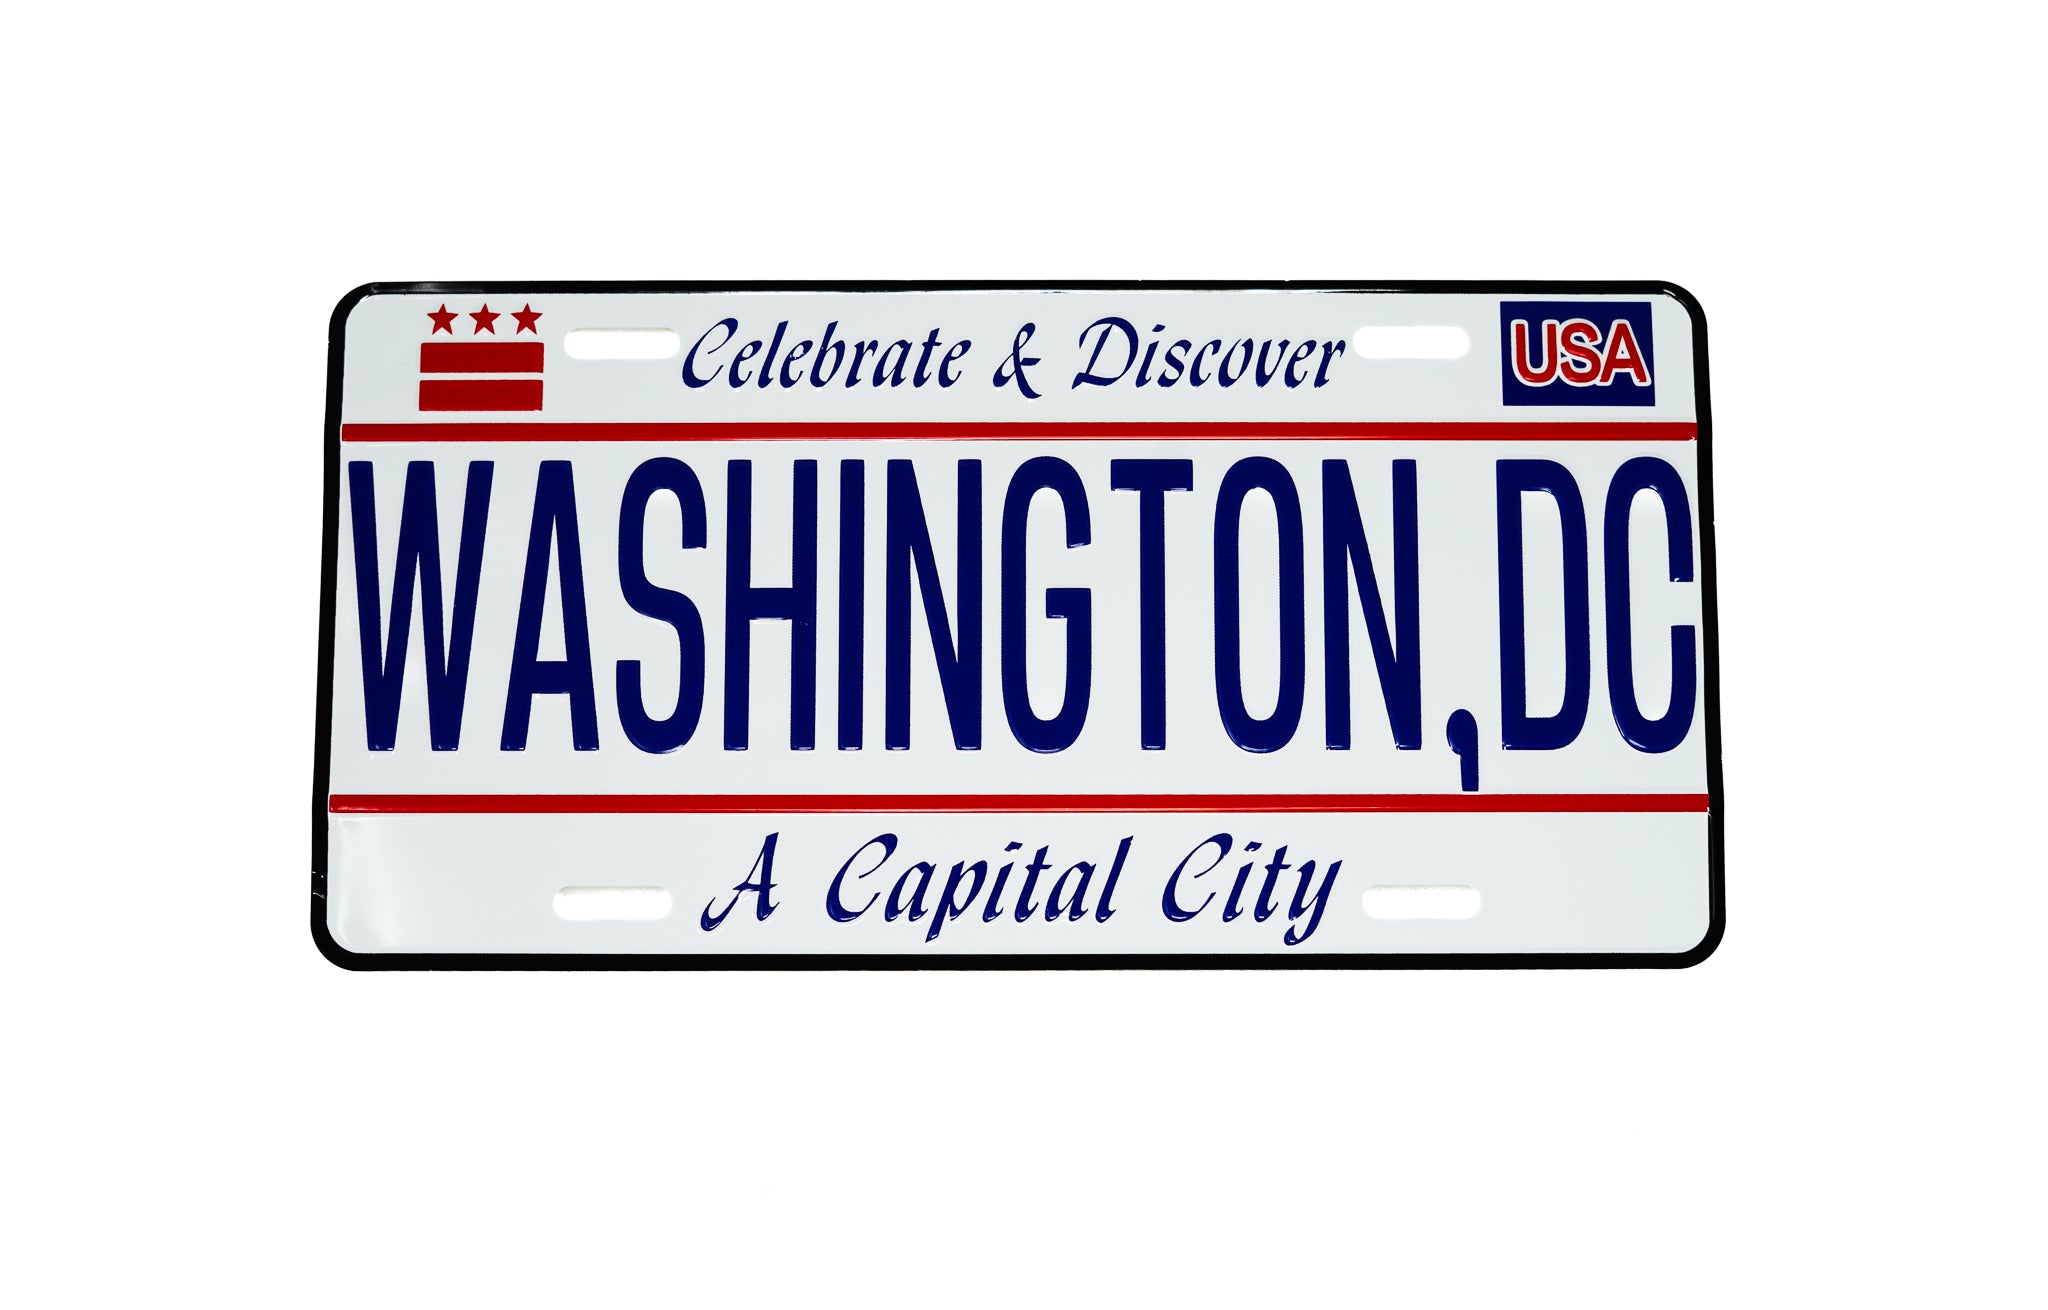 District of Columbia (DC) License Plate